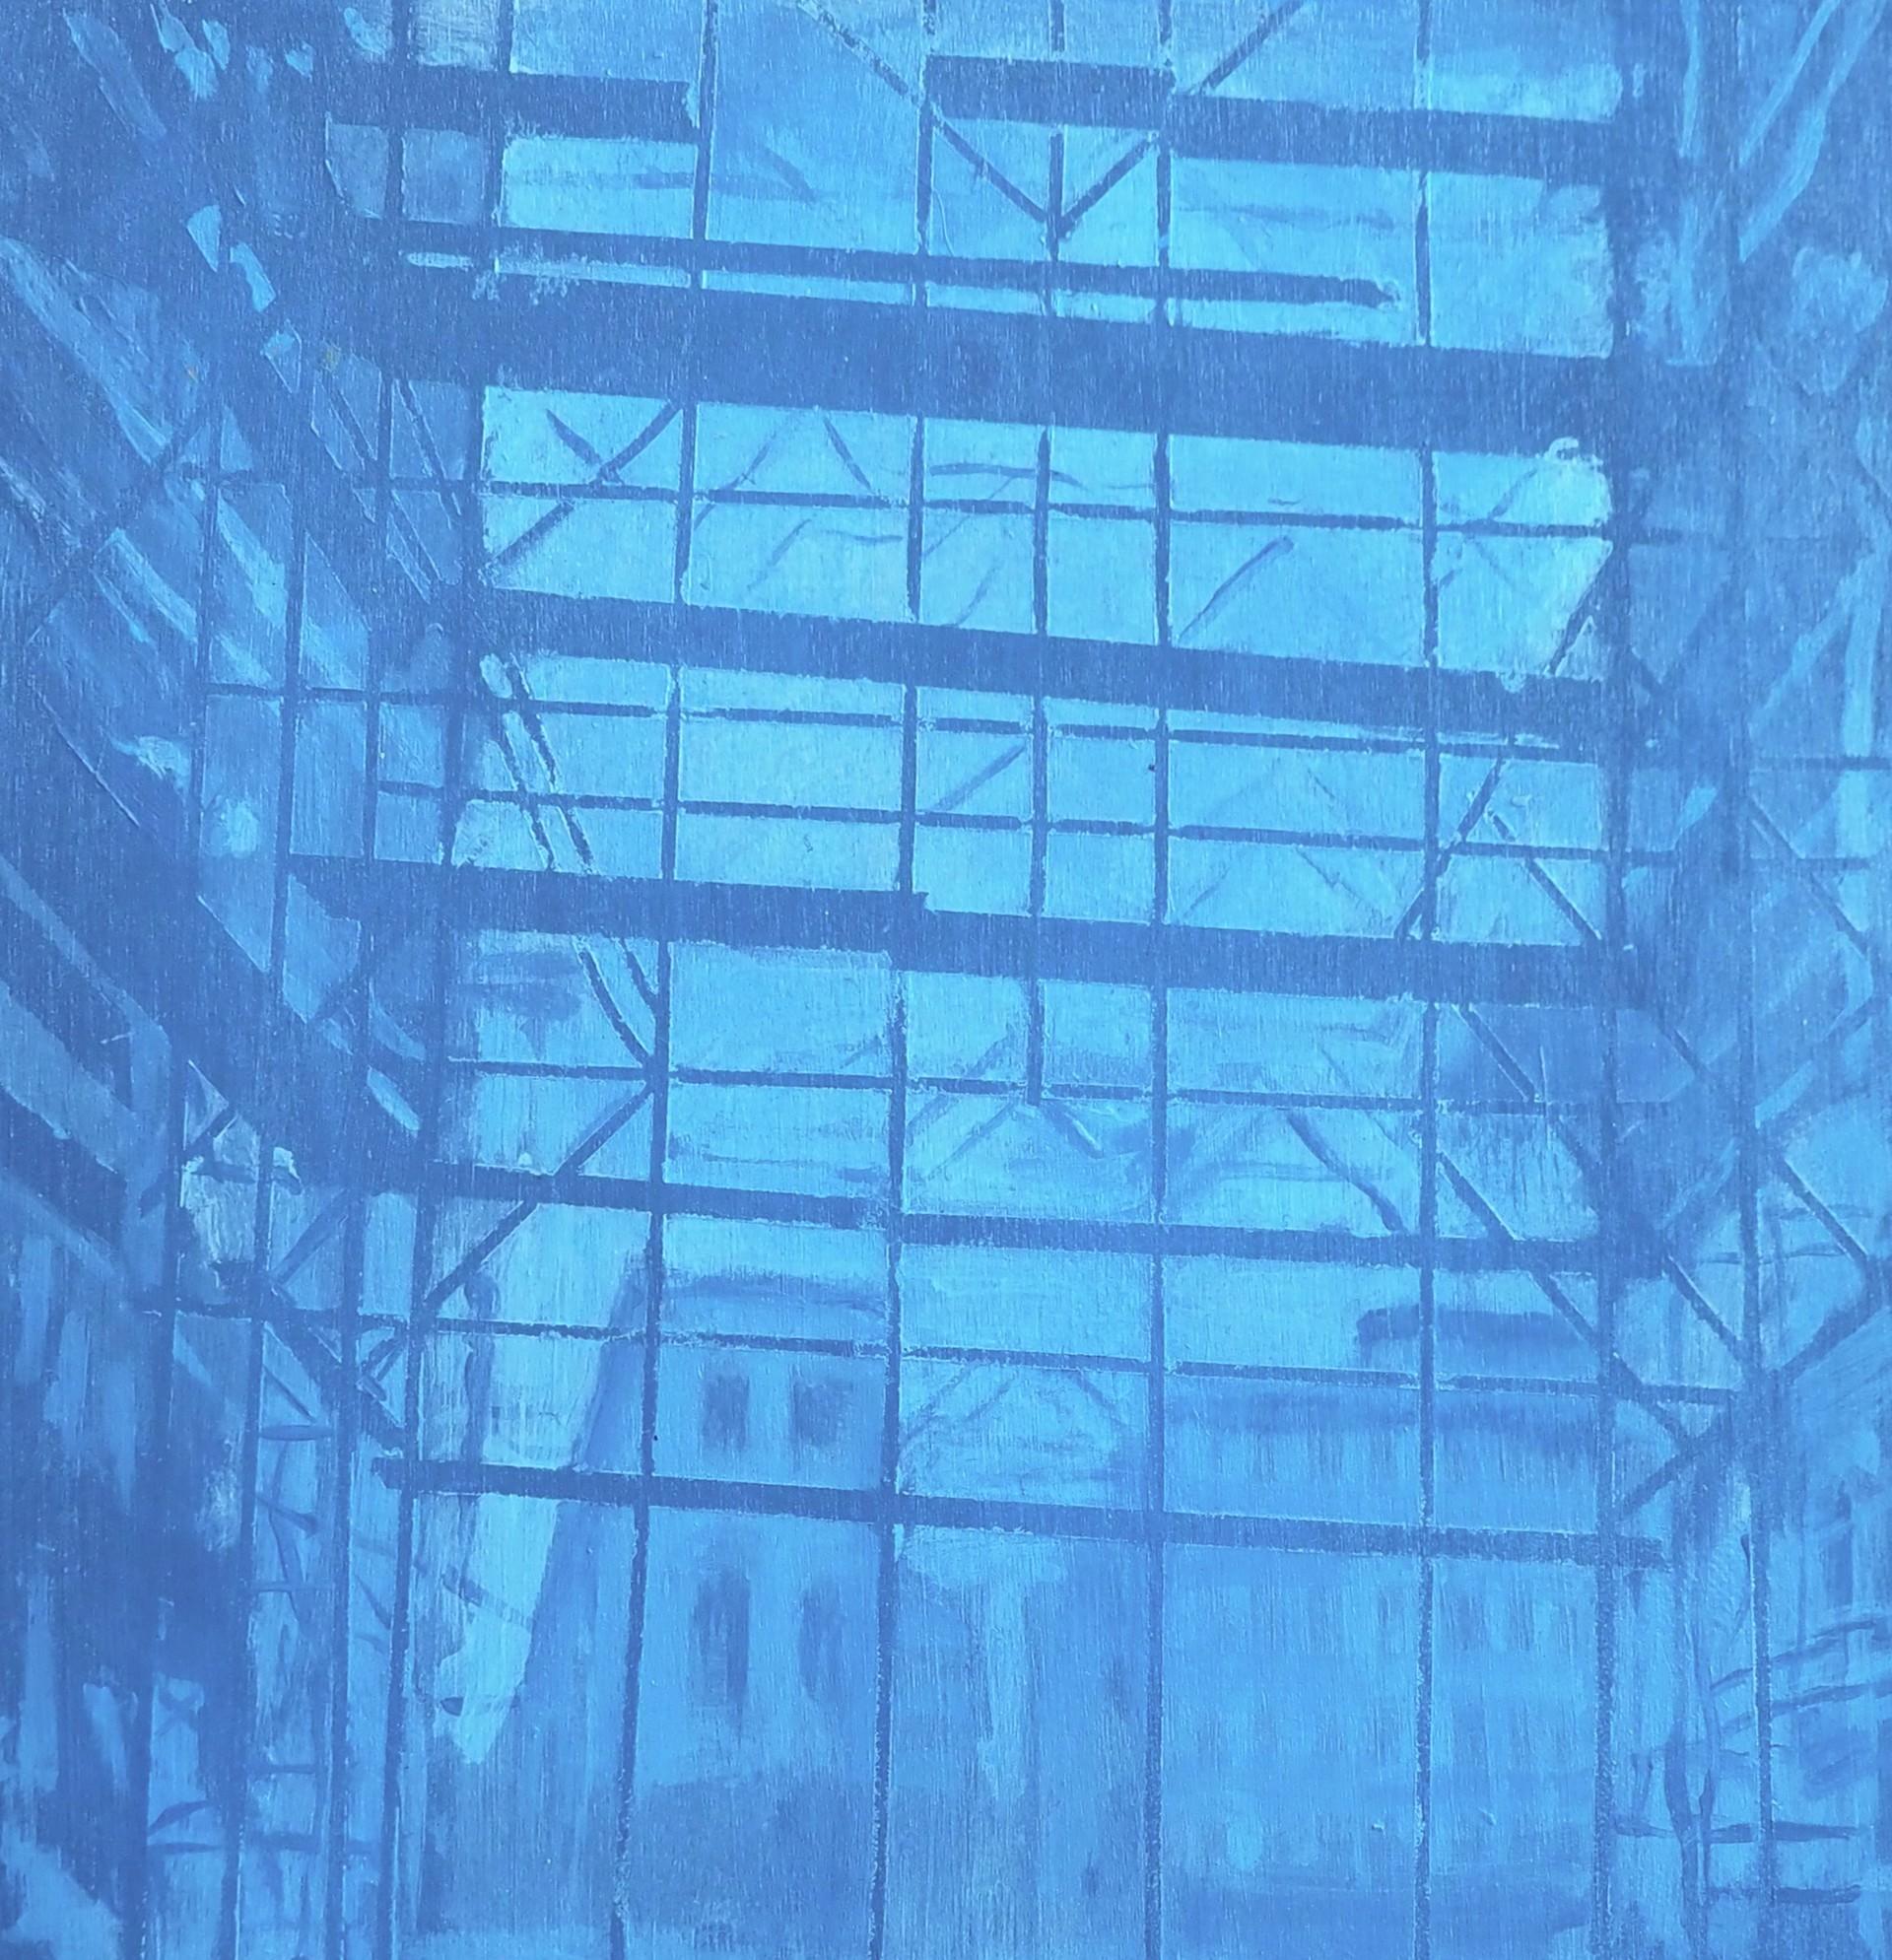 Repubblica displays a distant building surrounded by scaffolding and construction through subtle tones of blue, red, and orange in the foreground of the painting. Rogers-Horton's use of blue variations and collage showcase the honesty the forms